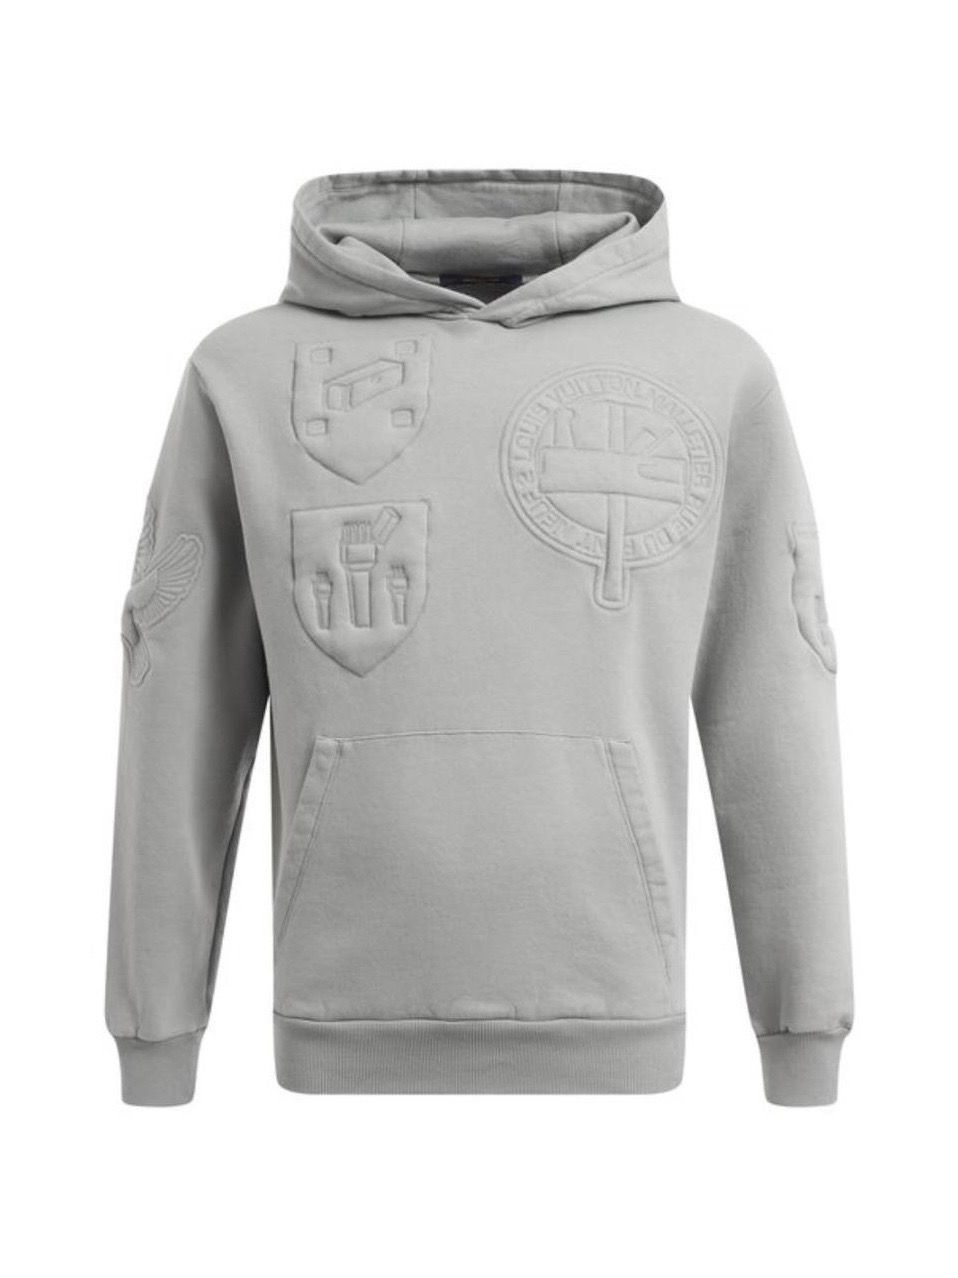 Louis Vuitton 3d Lv Graffiti Embroidered Zipped Hoodie in Grey for Men